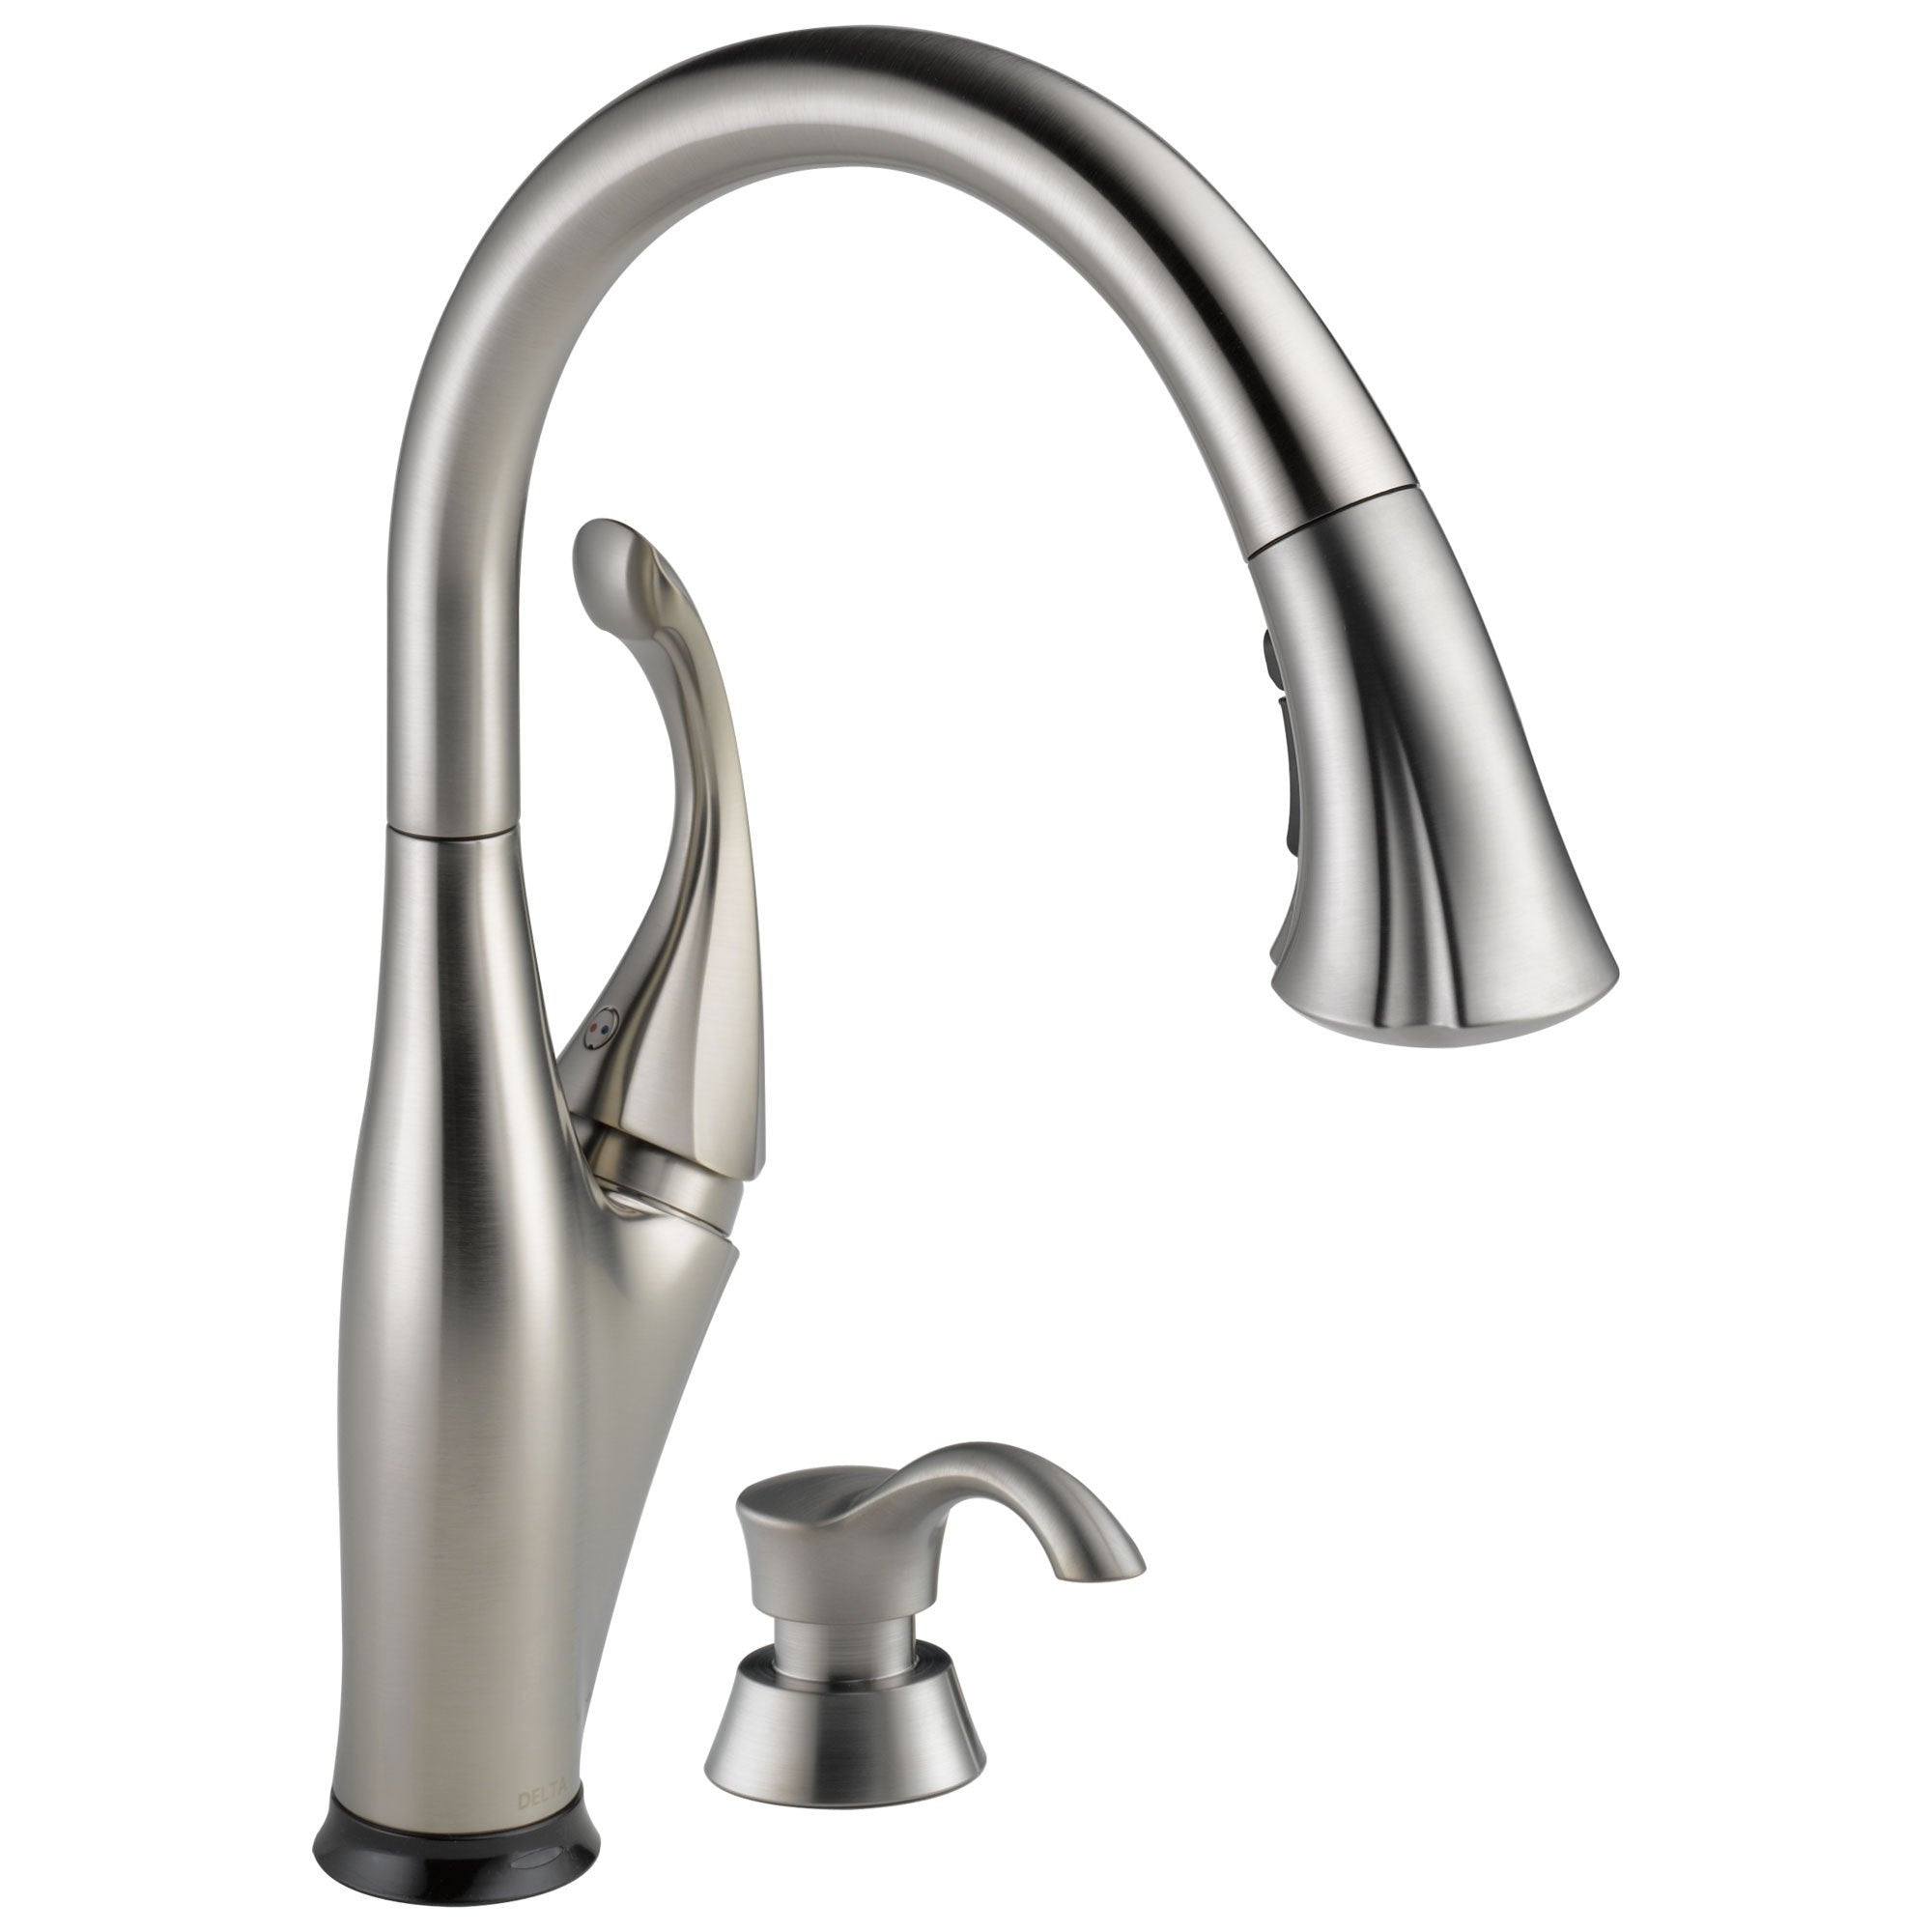 Delta Addison Collection Stainless Steel Finish One Handle Pull-Down Electronic Kitchen Sink Faucet with Touch2O Technology and Soap Dispenser 651339